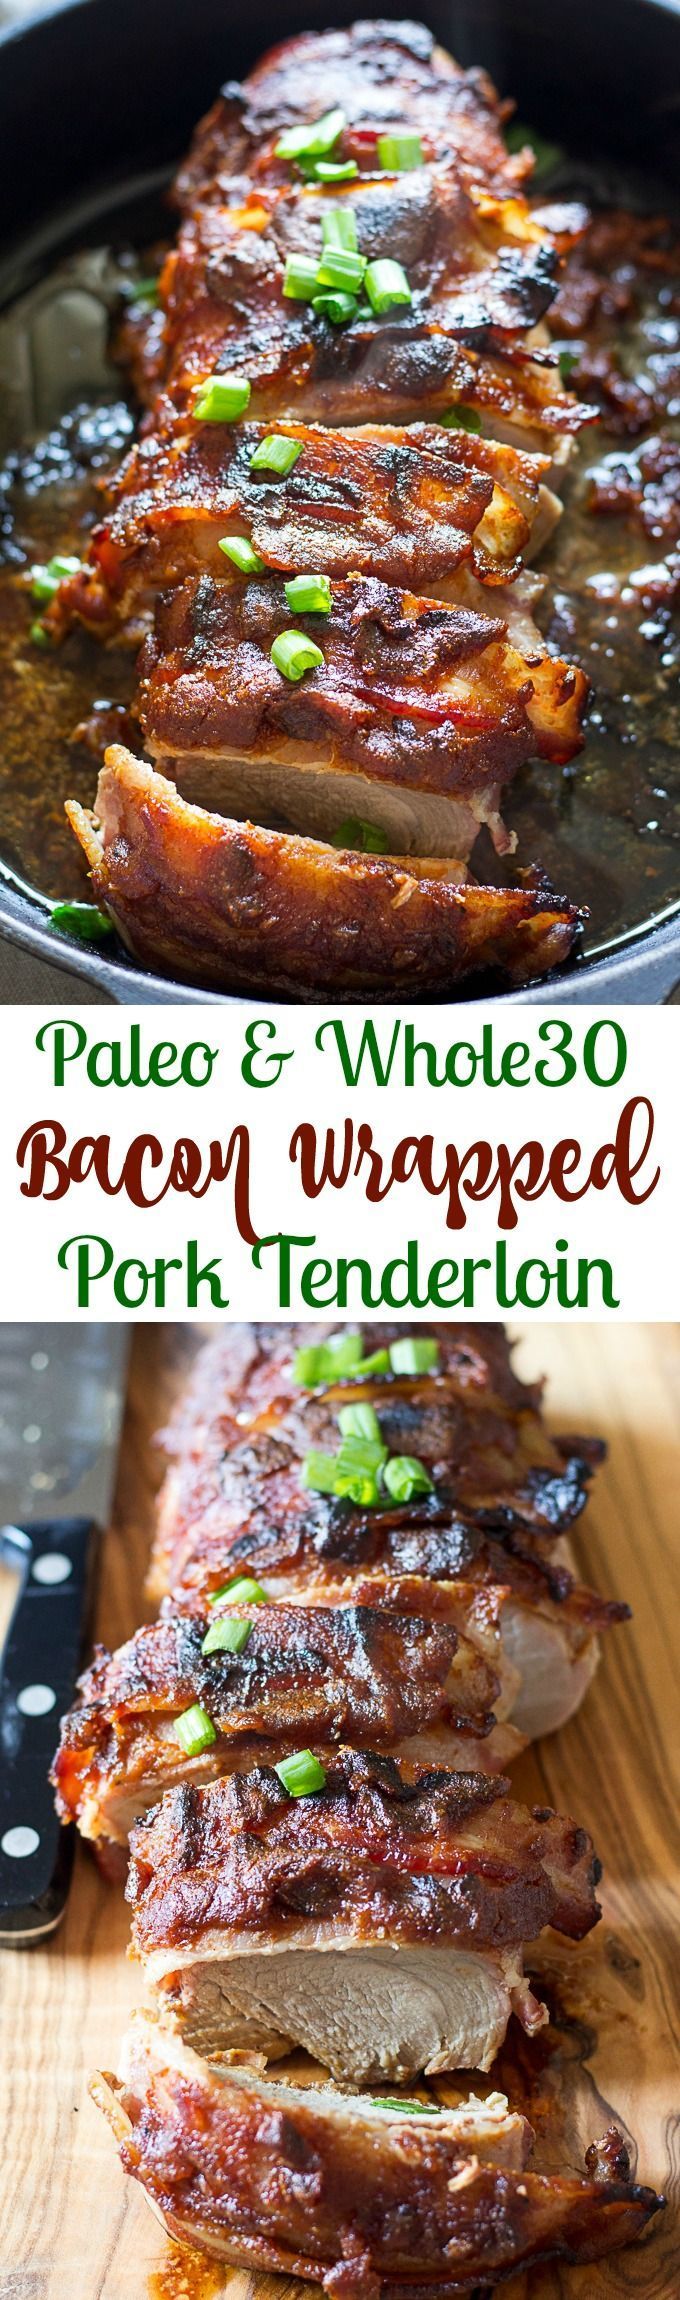 This Paleo and Whole30 Bacon Wrapped Pork Tenderloin has a sweet and smoky sauce thats refined sugar free, incredibly delicious